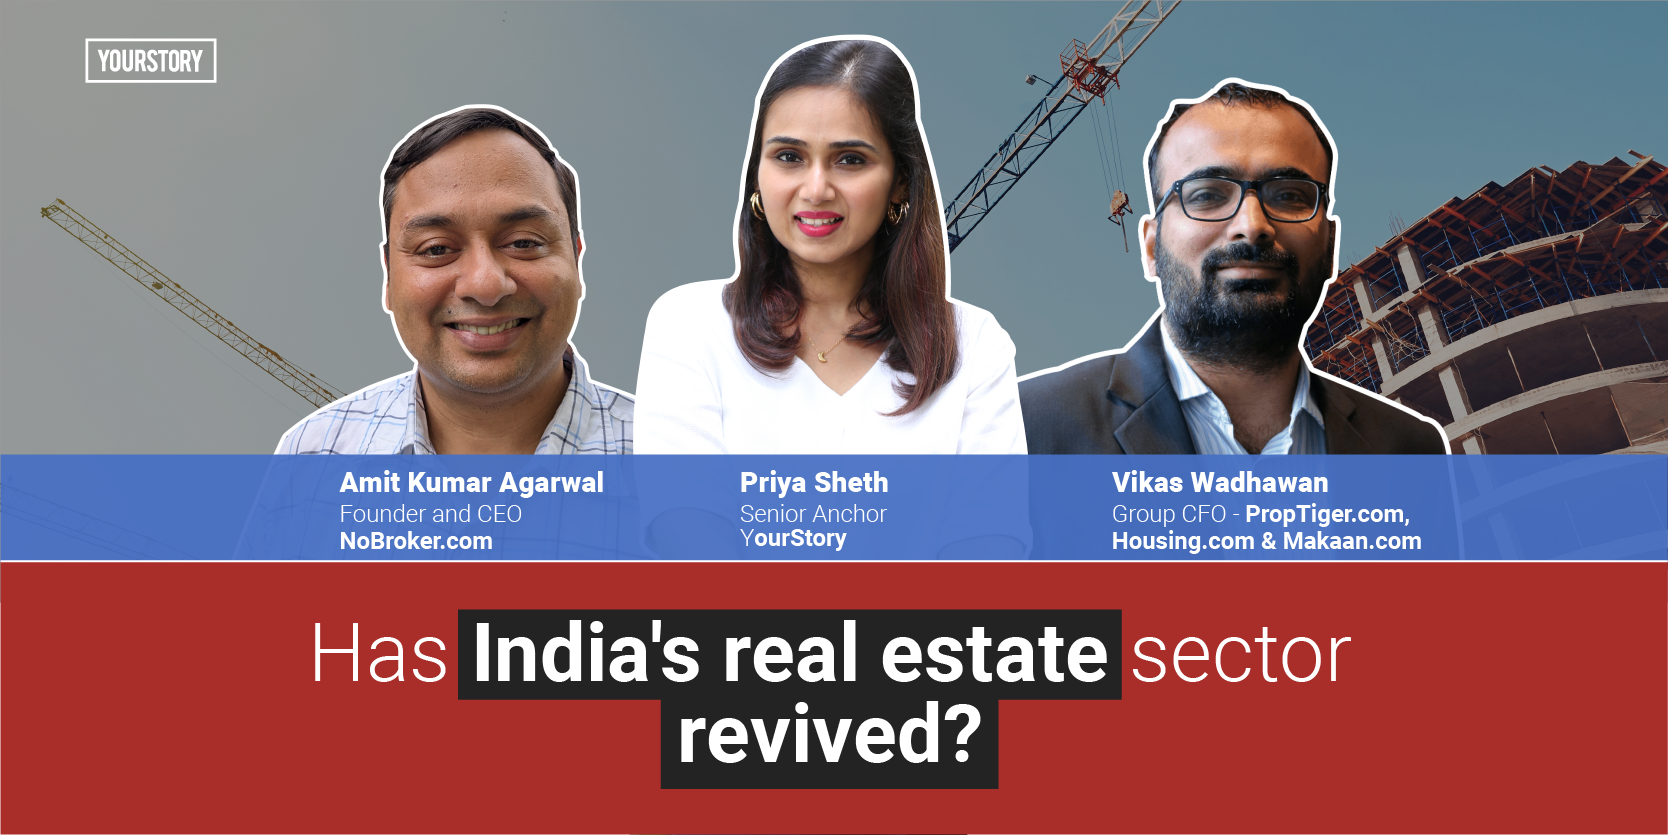 The changing dynamics of real estate sector in India